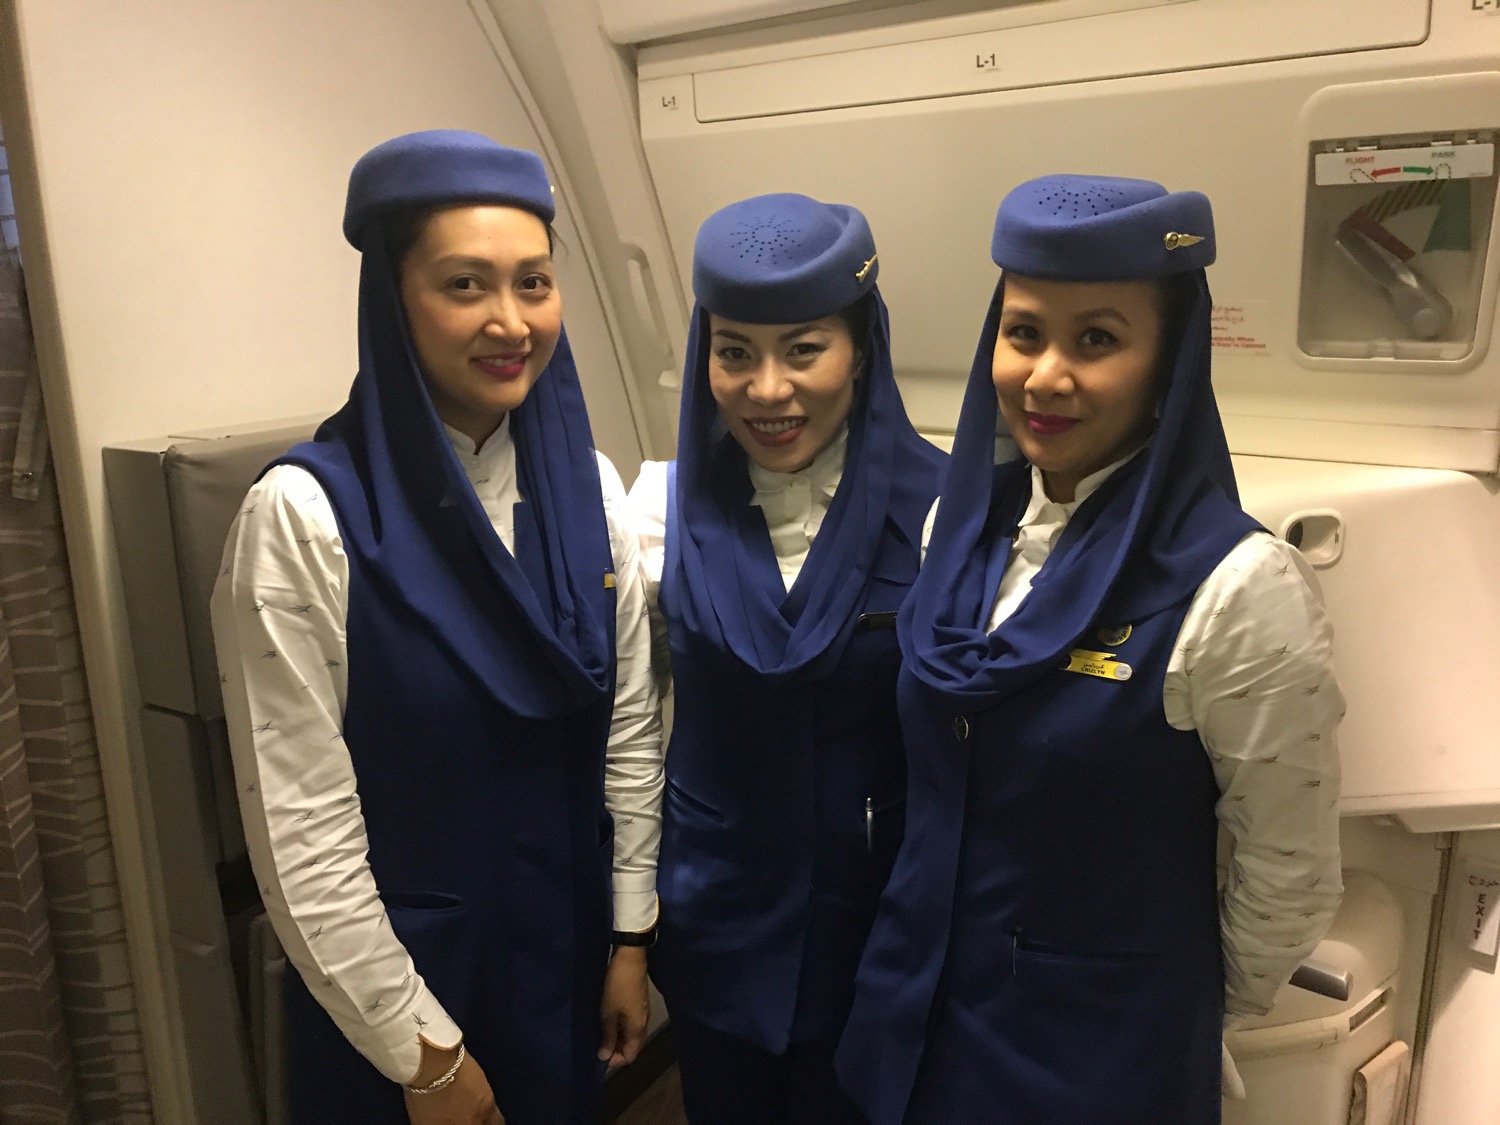 a group of women wearing blue uniforms and hats